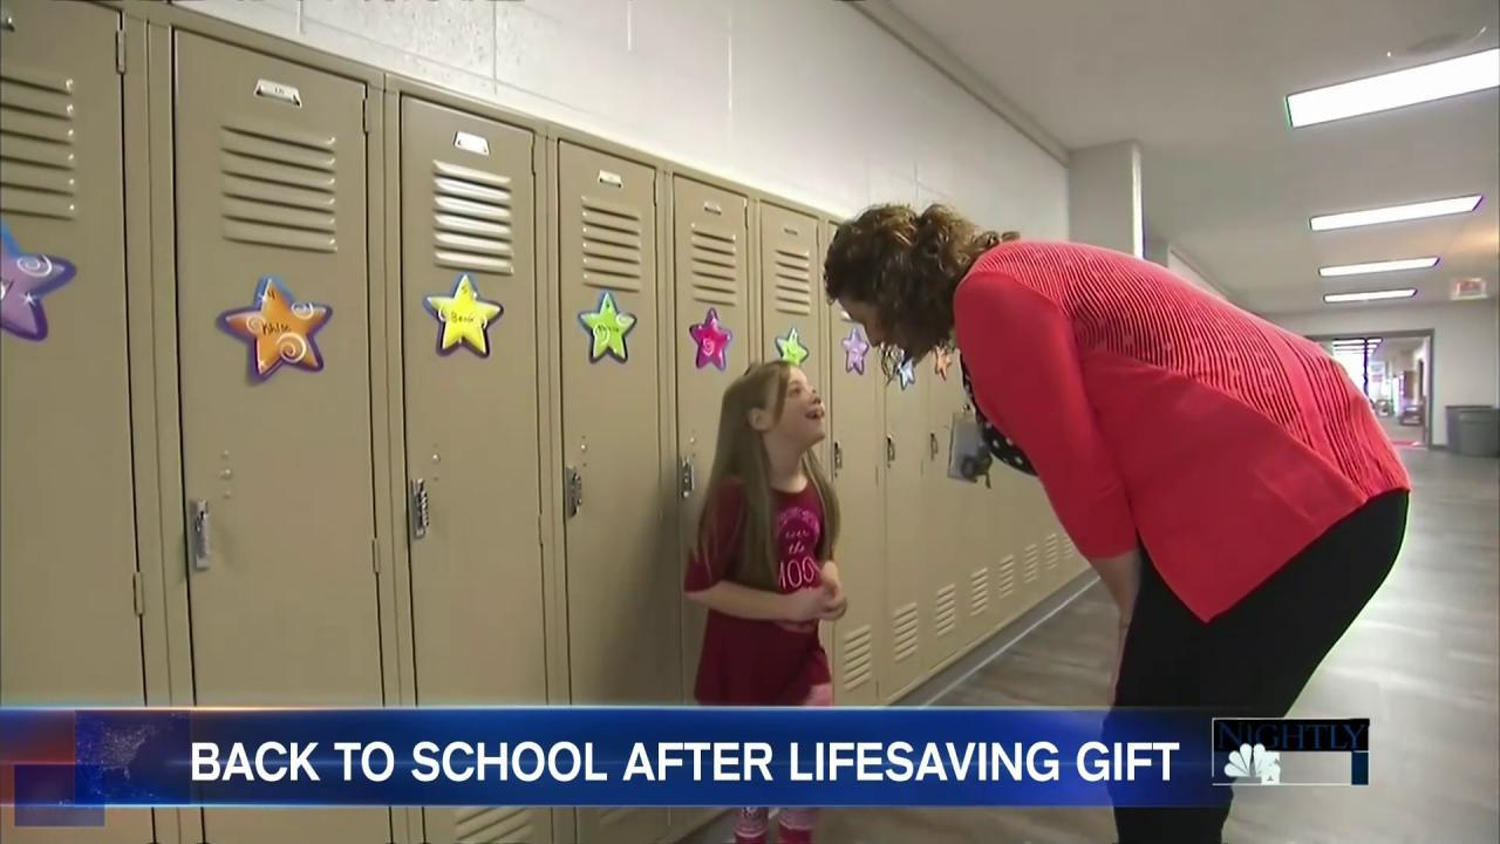 It's Back to School for 8-Year-Old Girl After Lifesaving Gift